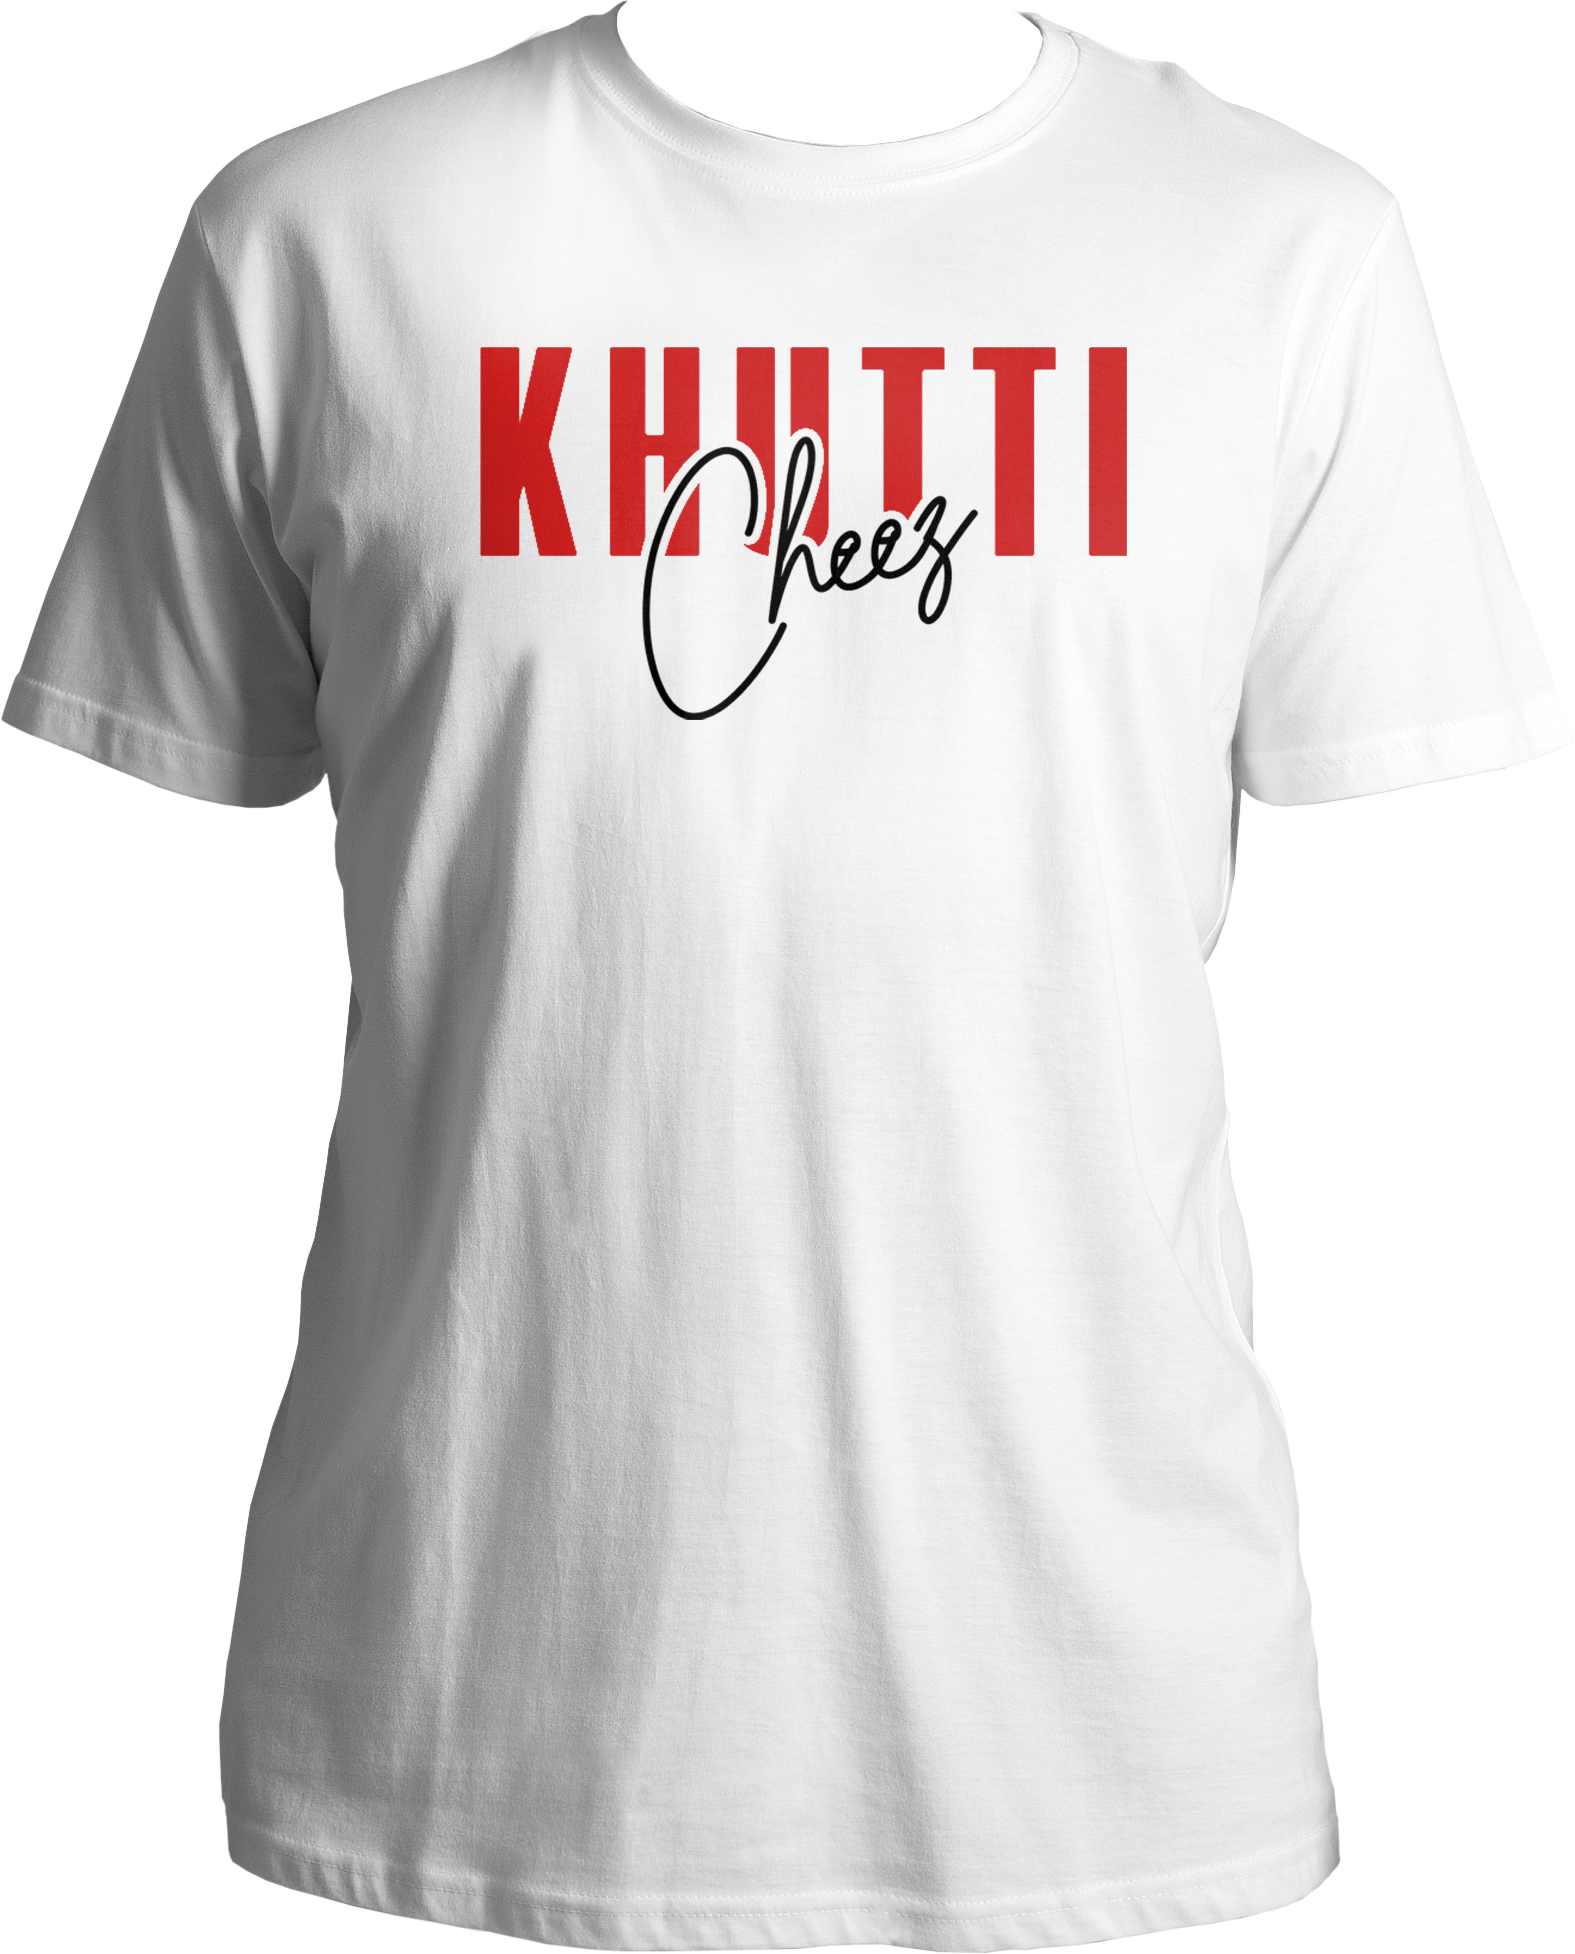 "Jatt Taan Sire Di Khutti Cheez Ai!" - Get ready to groove to Diljit's beats with this catchy line from the song, now immortalized on our stylish tee.<br data-mce-fragment="1"><br data-mce-fragment="1">We're thrilled to present a brand new and amazing range of Diljit Dosanjh T-Shirts, specially crafted for all his fans around the world. Dive into the magic of Diljit's music, movies, and charisma with our exclusive collection.